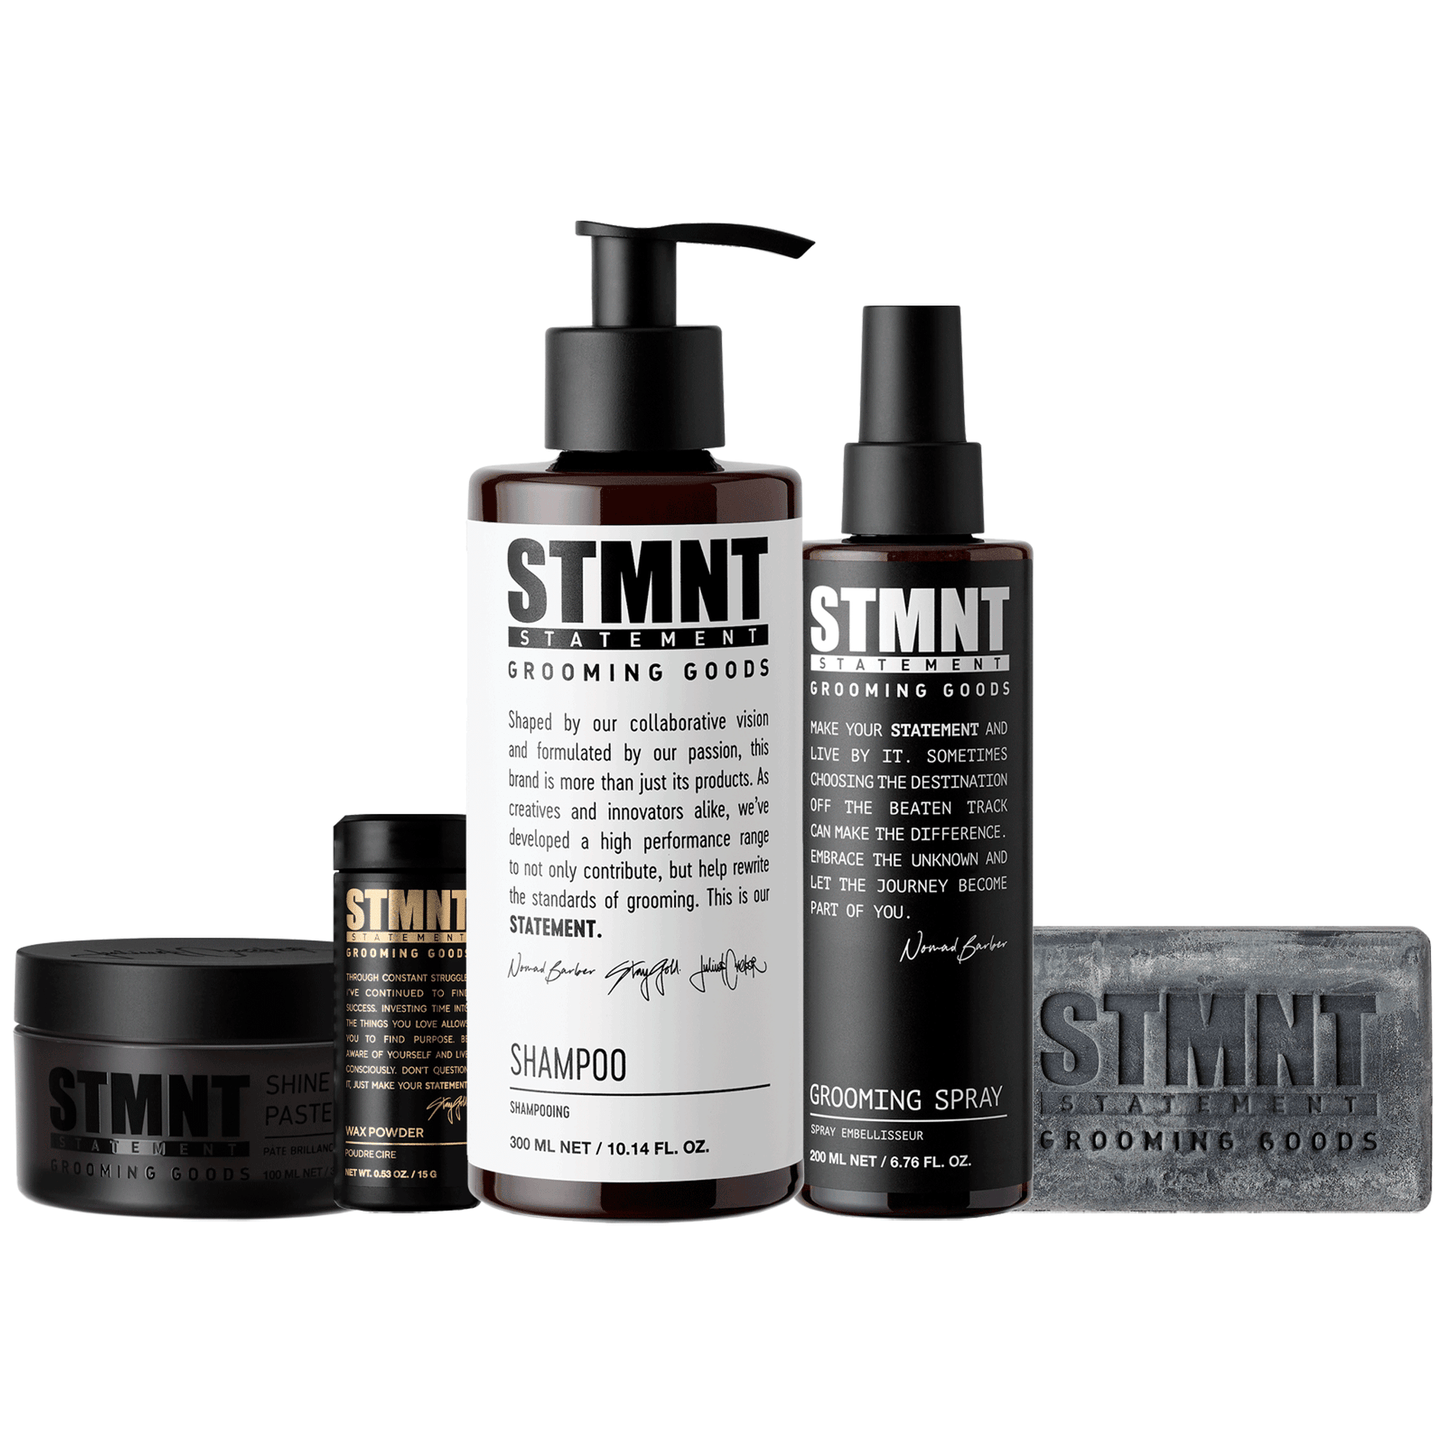 STMNT Statement Grooming Goods Styling Kit